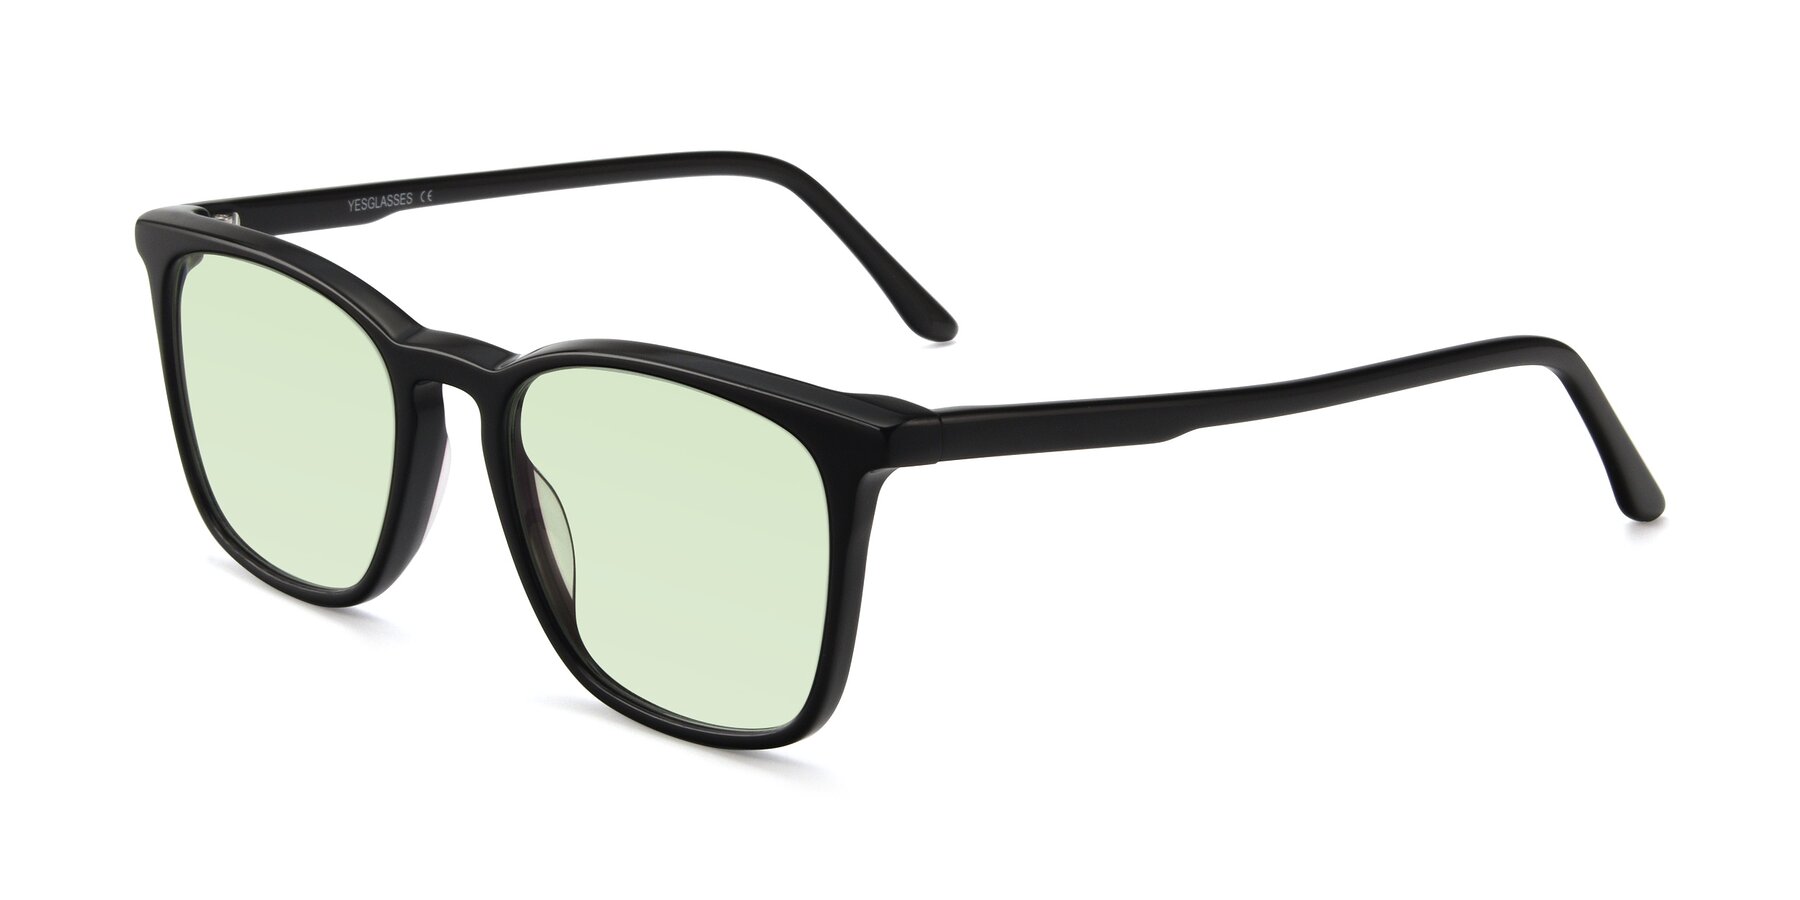 Angle of Vigor in Black with Light Green Tinted Lenses